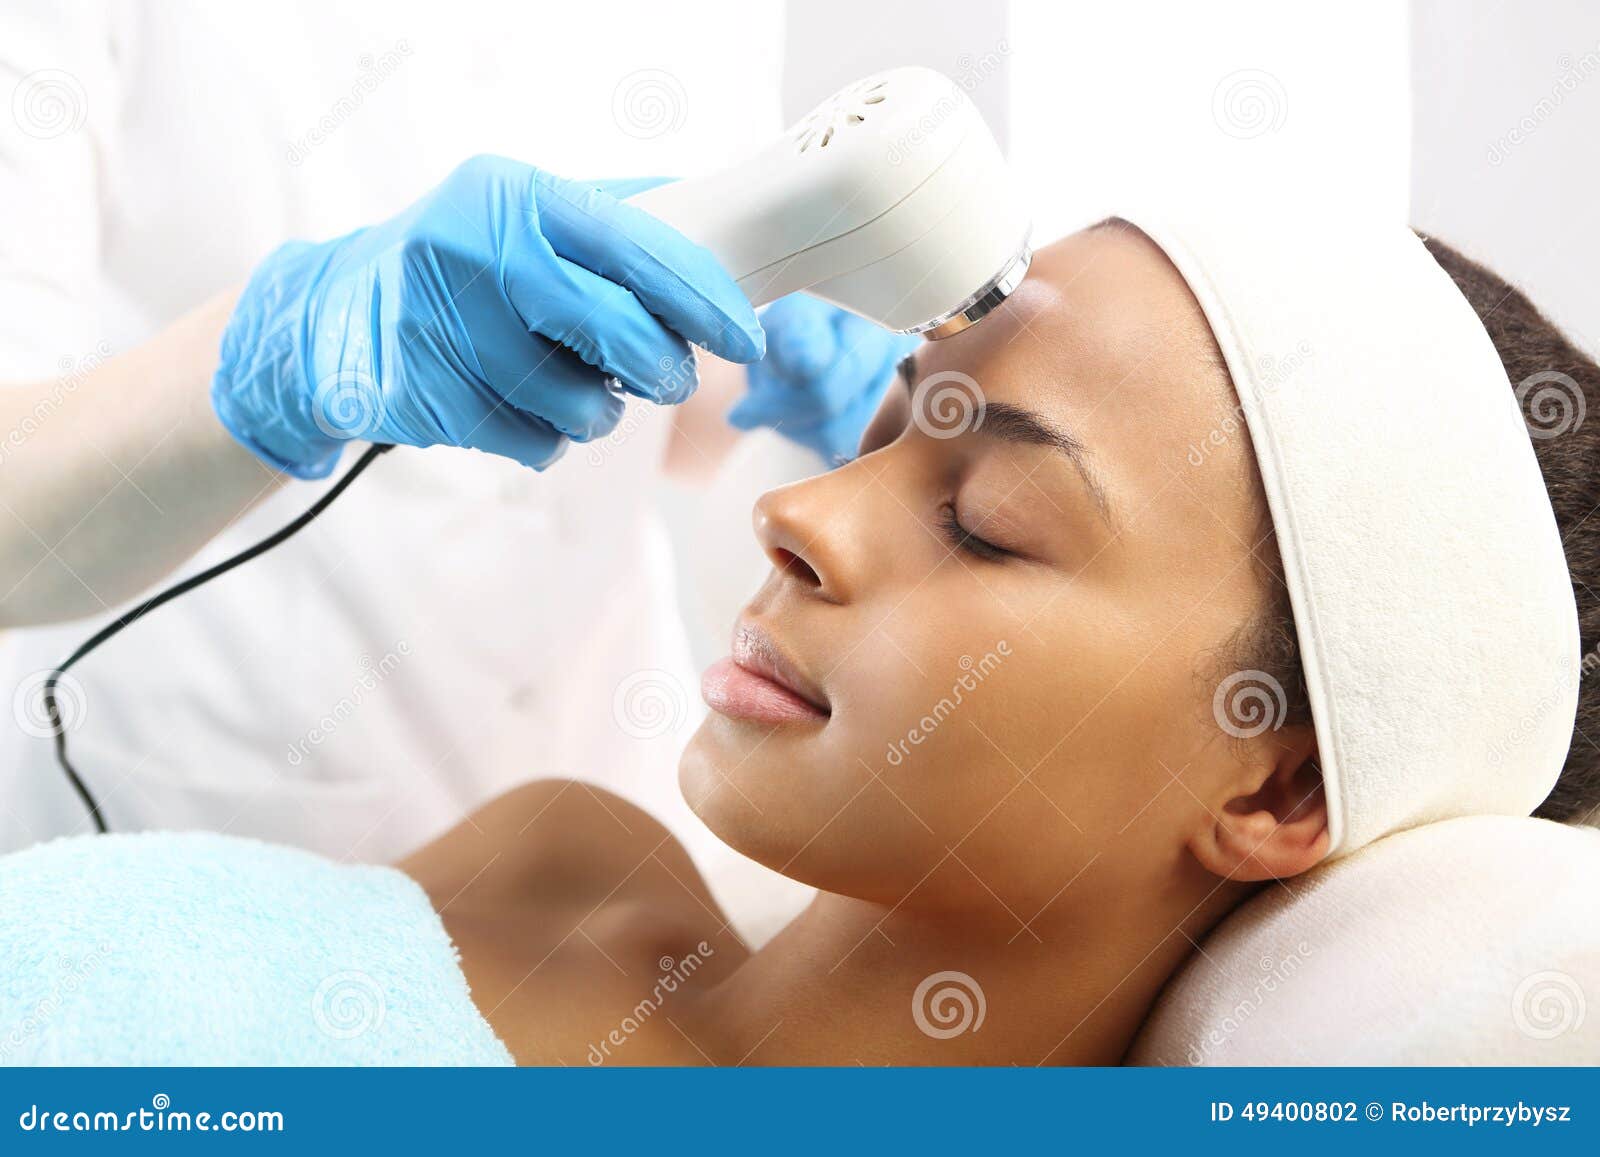 ultrasound, woman at the beautician